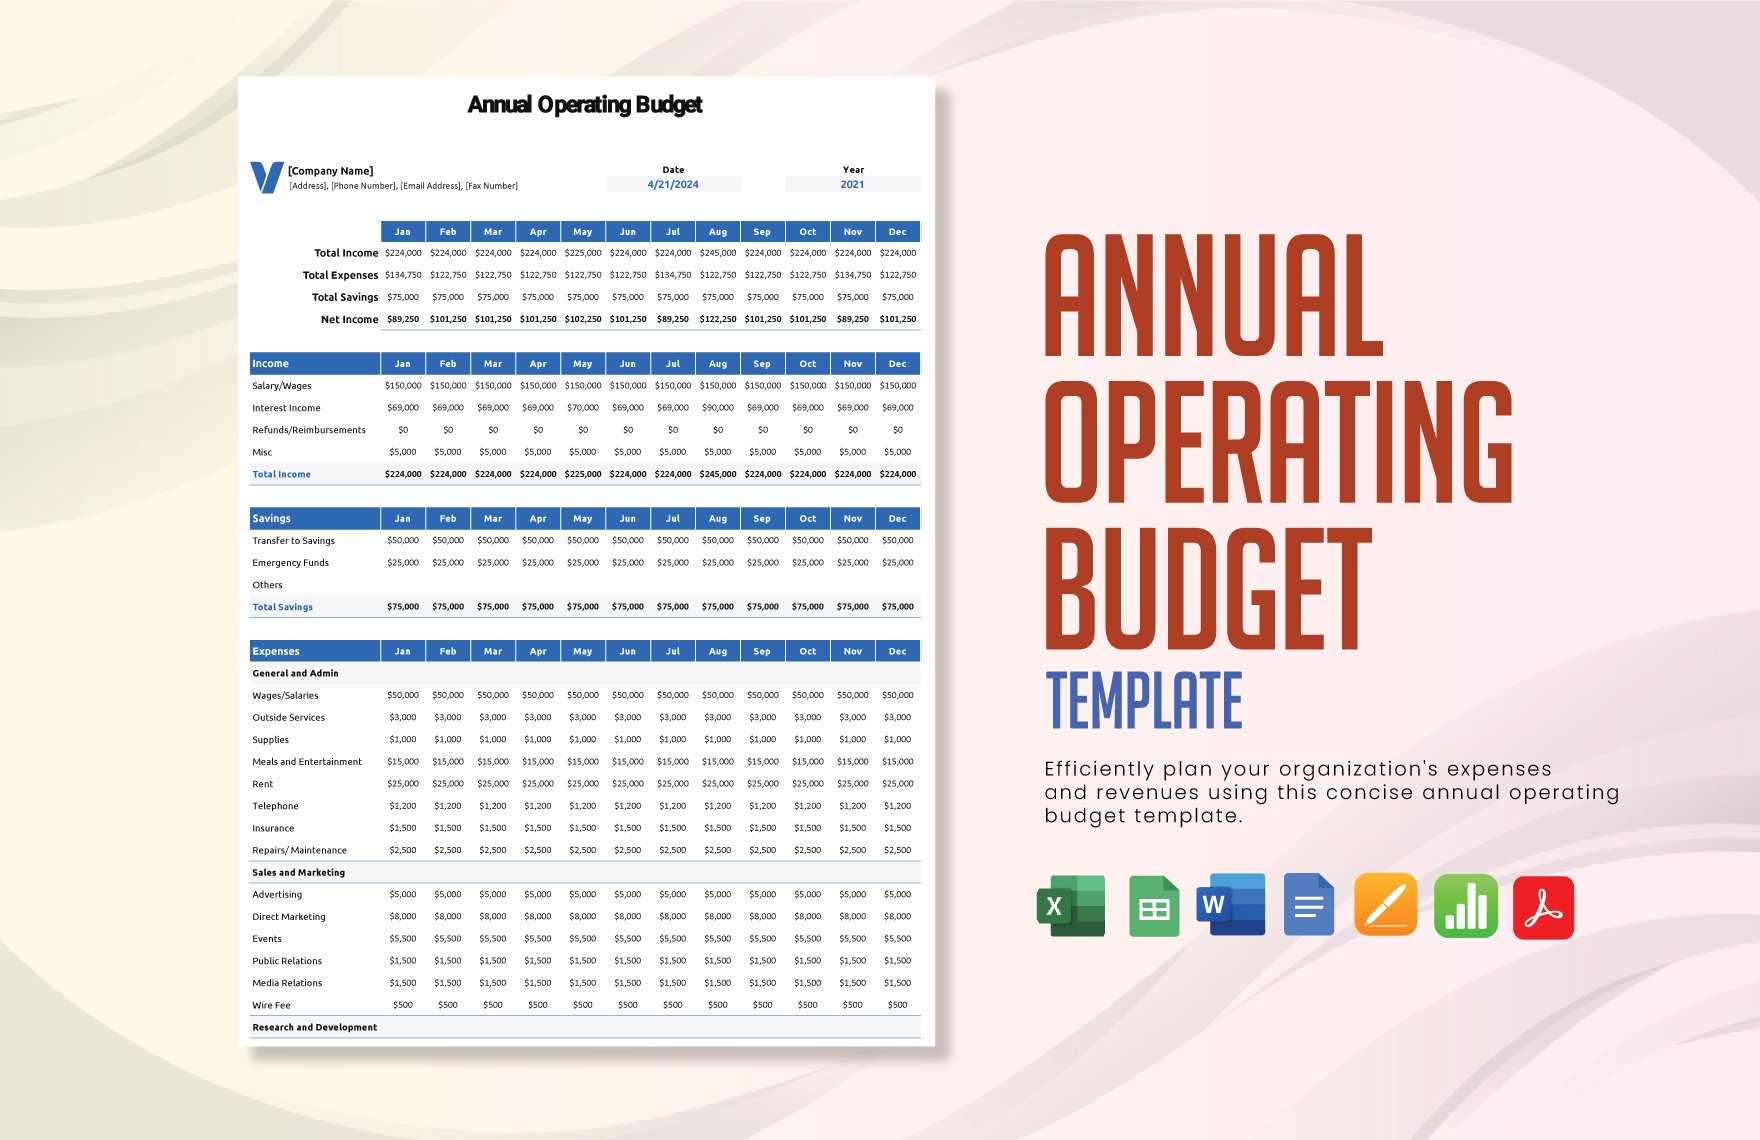 Annual Operating Budget Template in Word, Google Docs, Excel, PDF, Google Sheets, Apple Pages, Apple Numbers